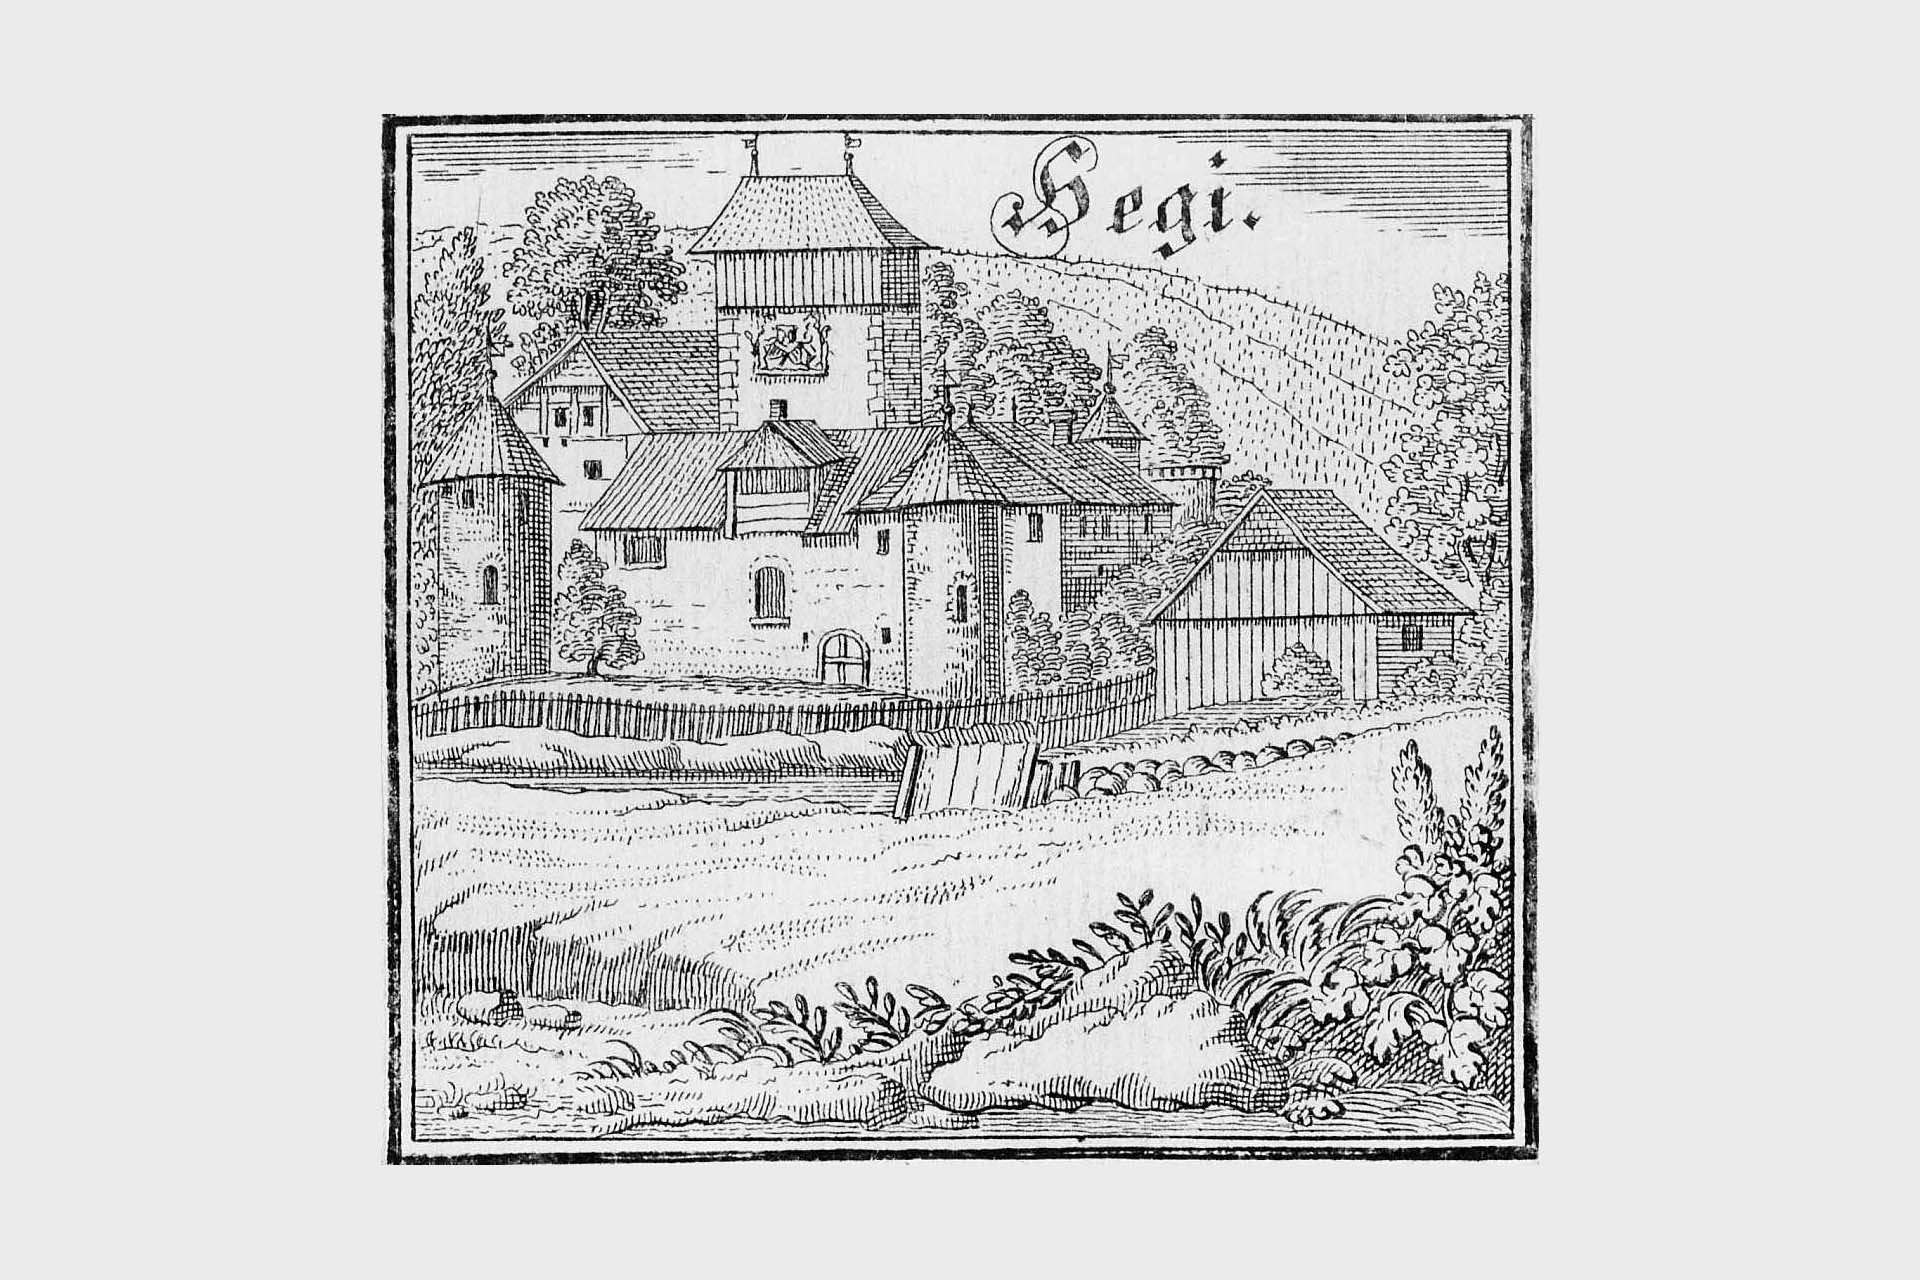 The oldest view of the palace complex by Johannes Meyer, 1685